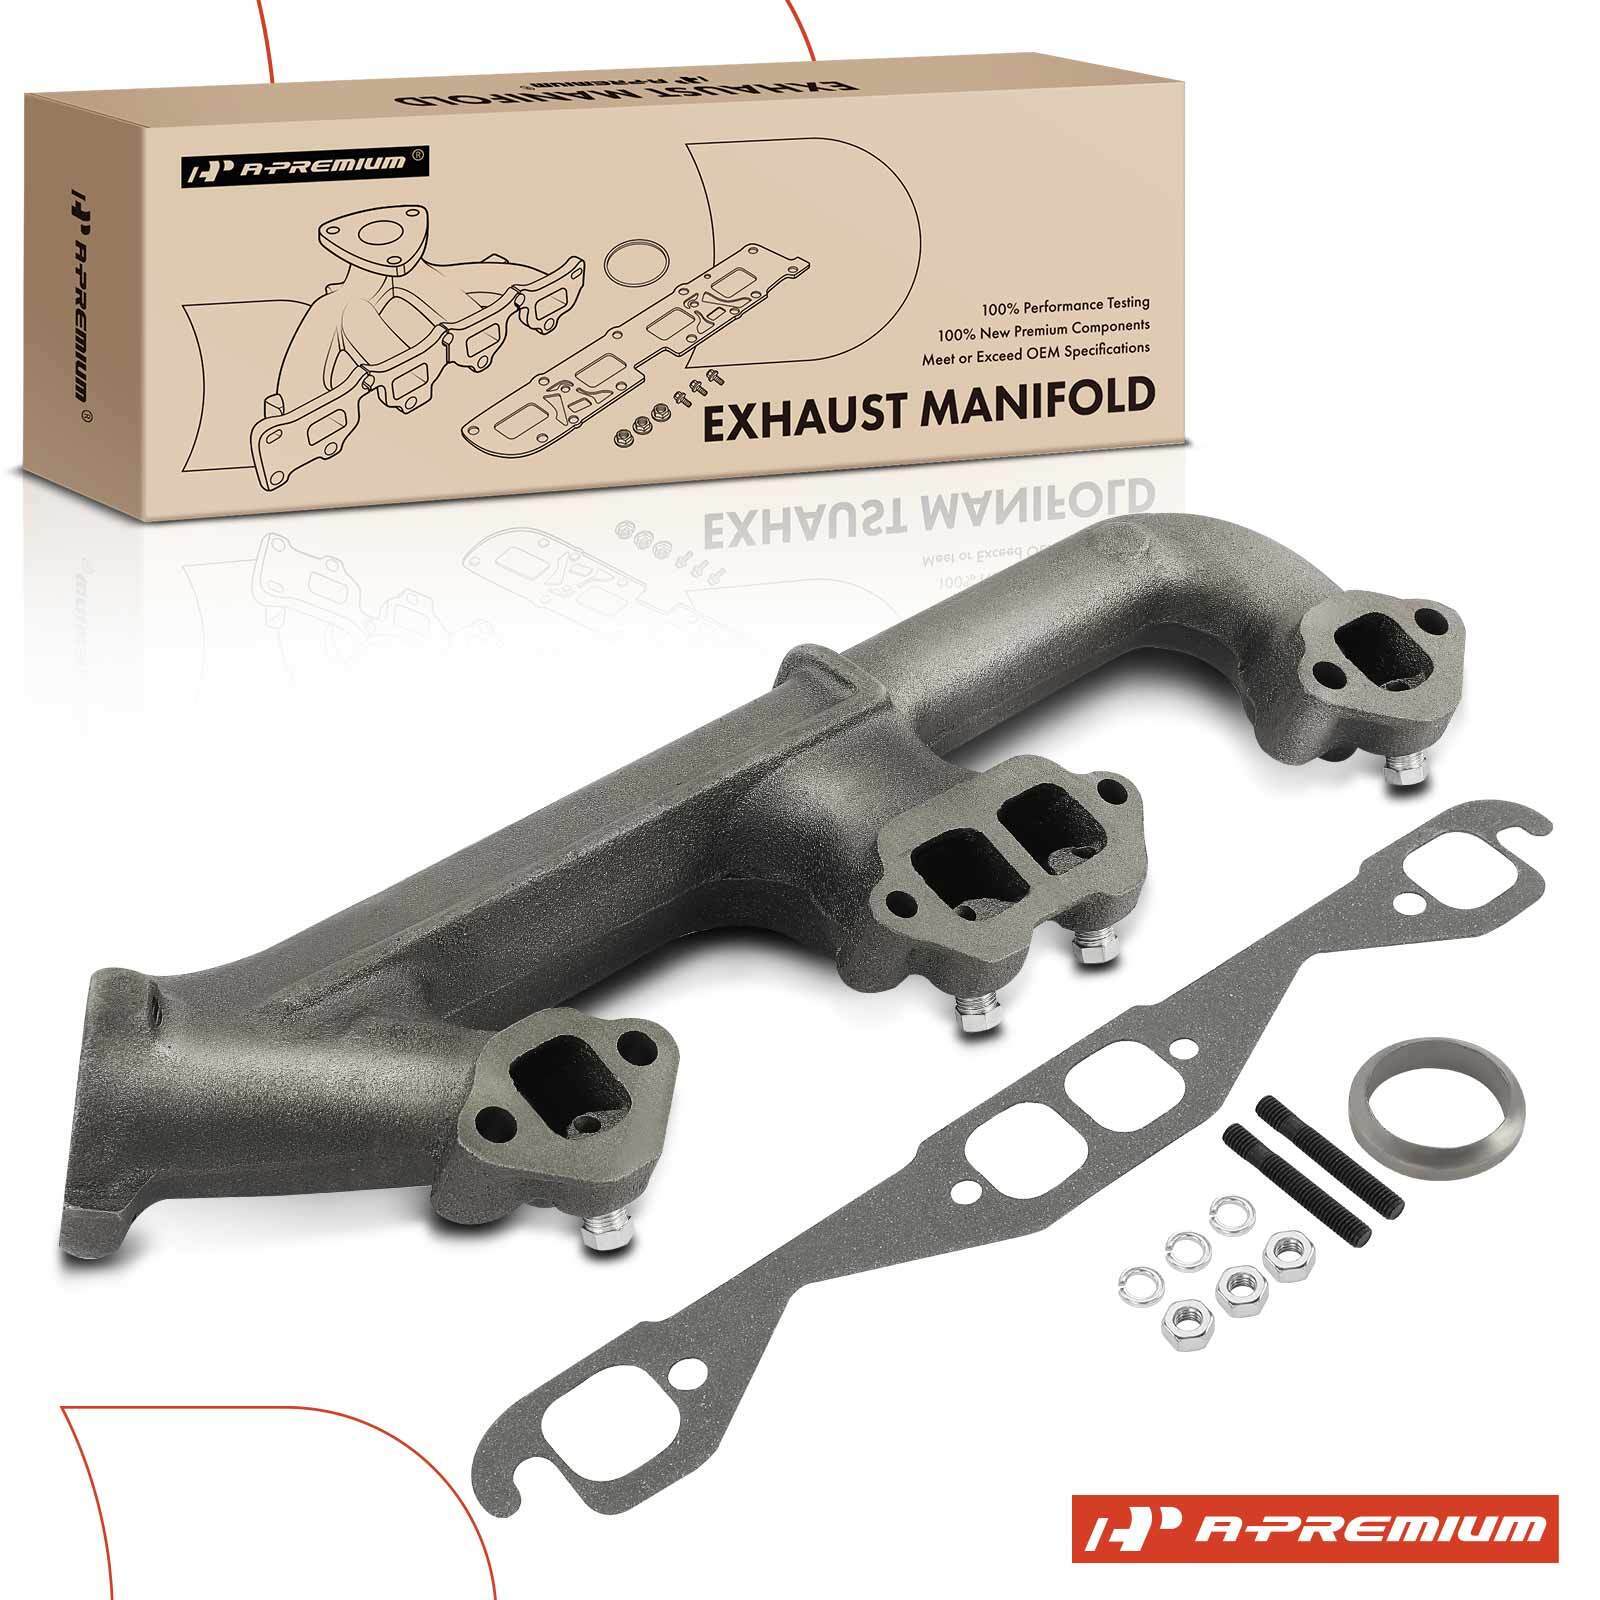 Right Exhaust Manifold with Gasket for Buick Century Pontiac Firebird Olds Chevy